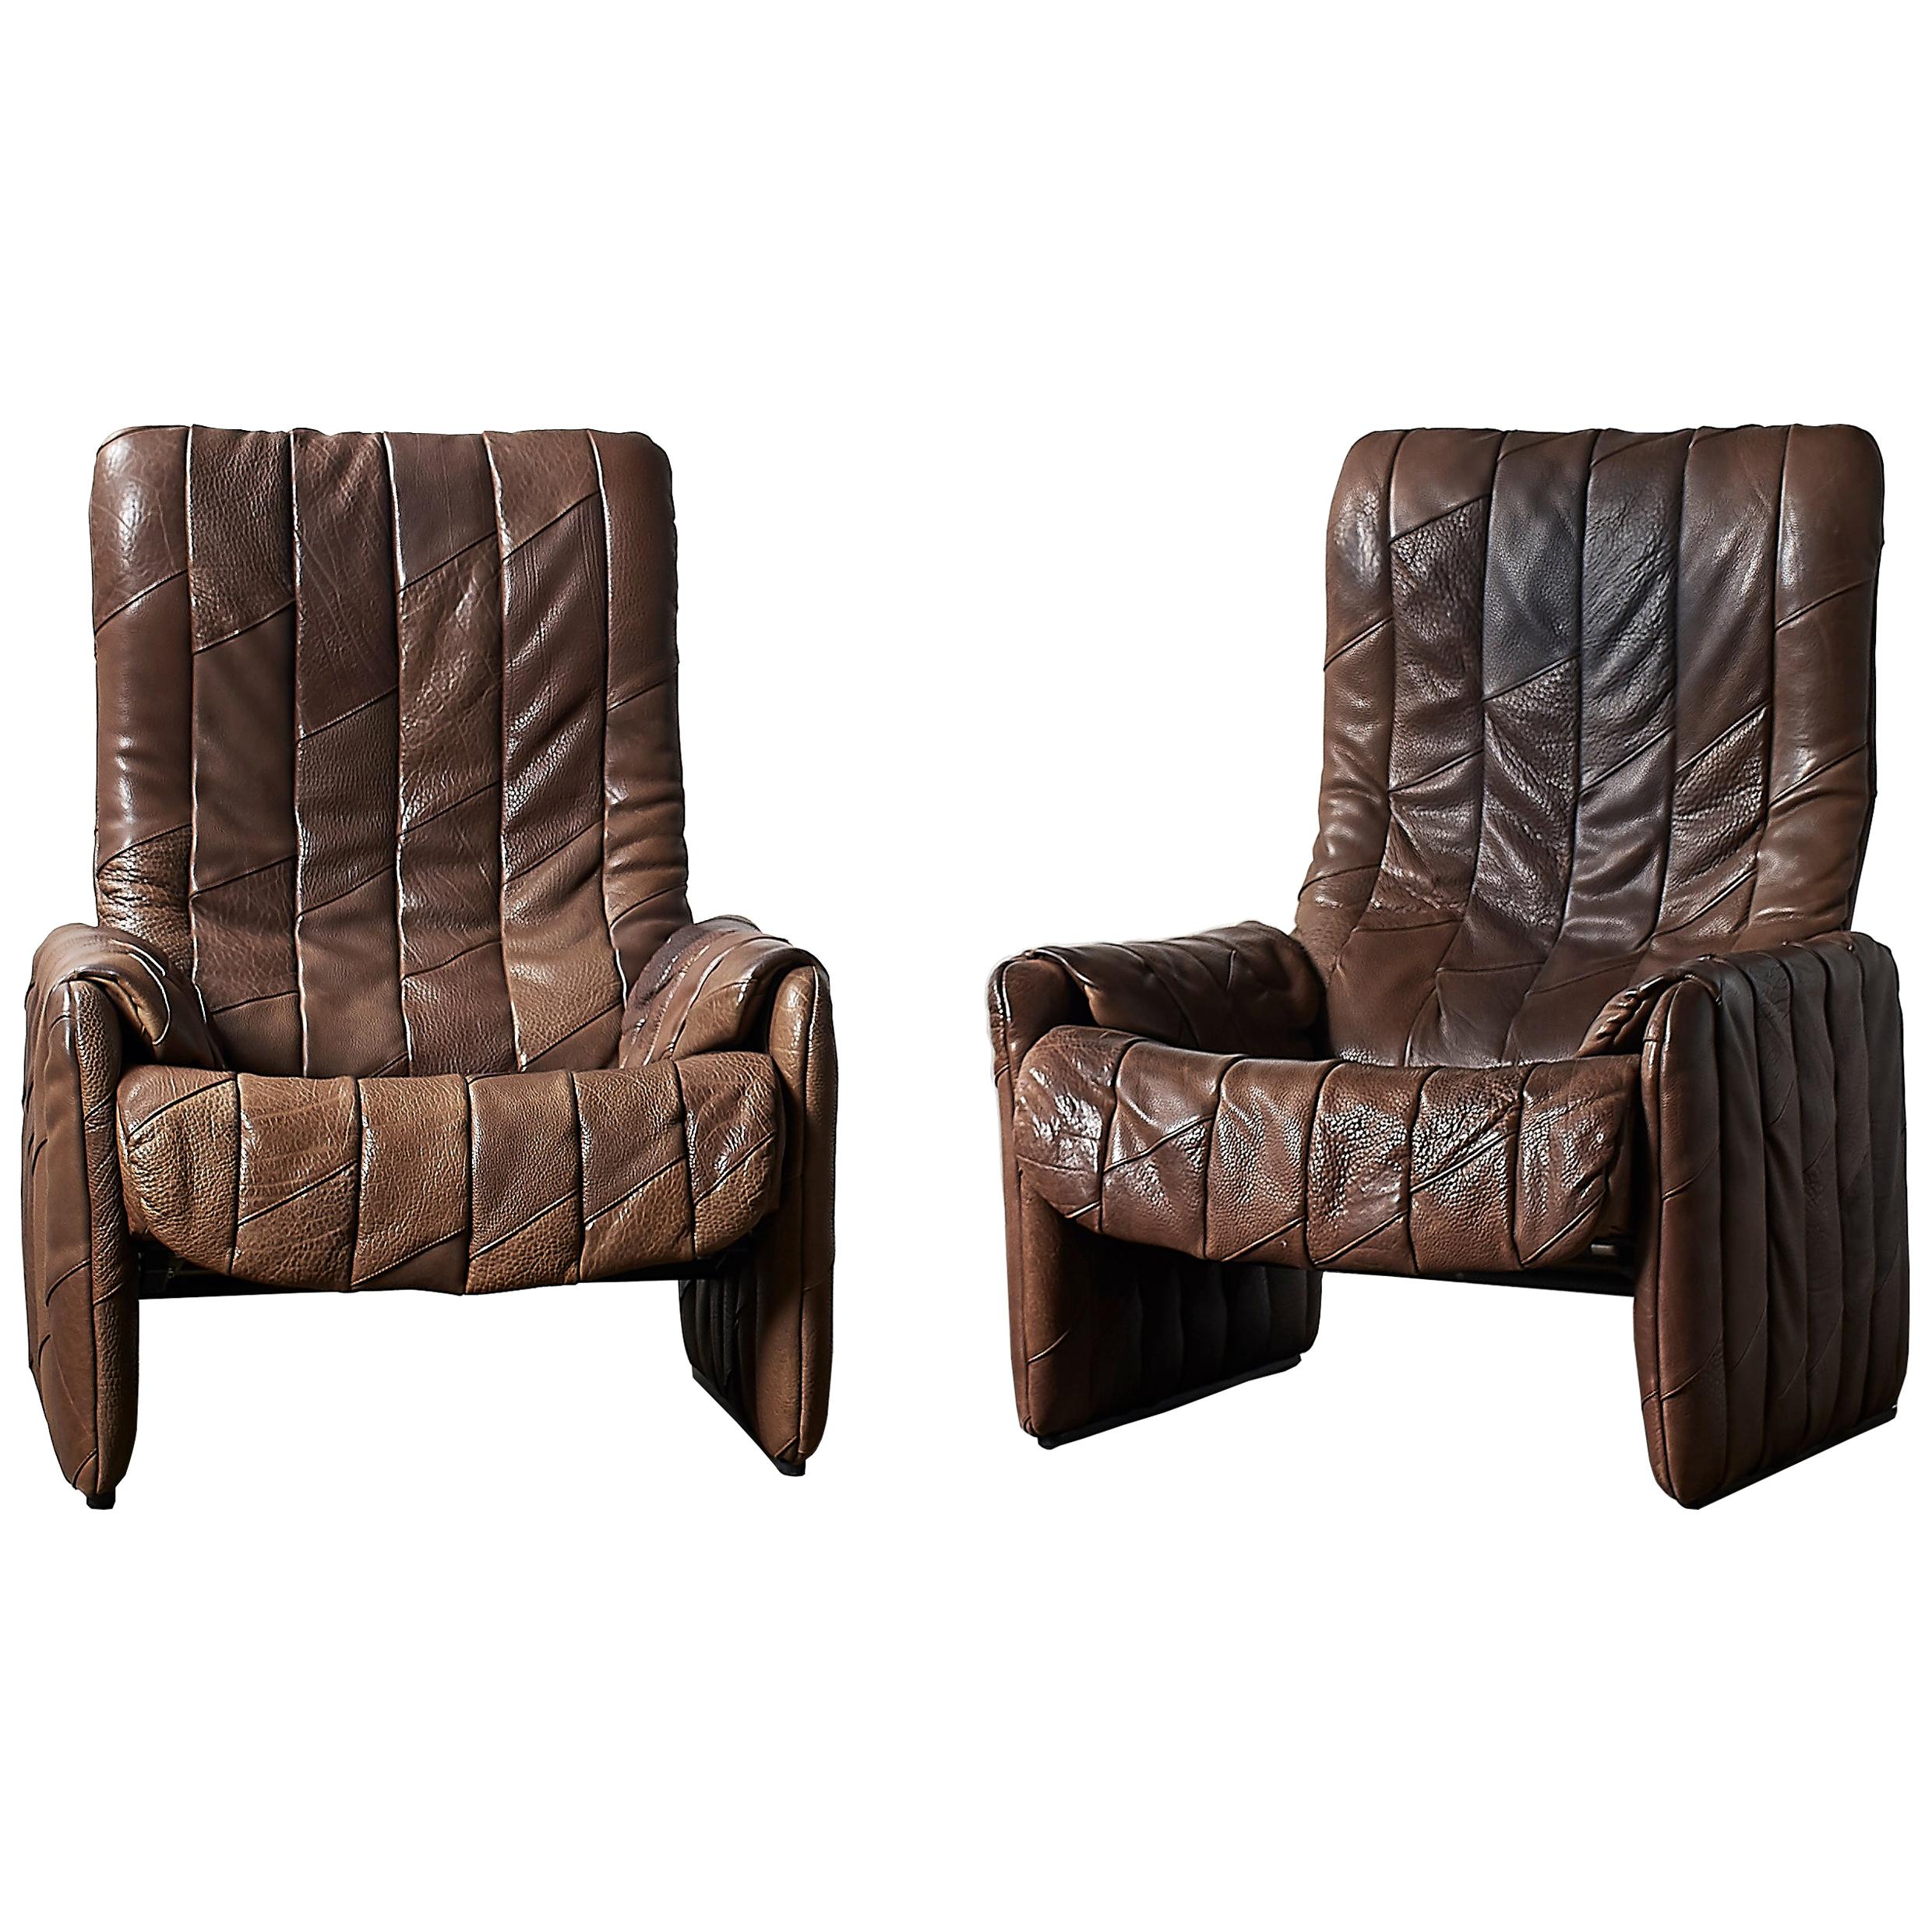 Pair of 1970s De Sede Patchwork Buffalo Leather Reclining Lounge Chairs DS-50